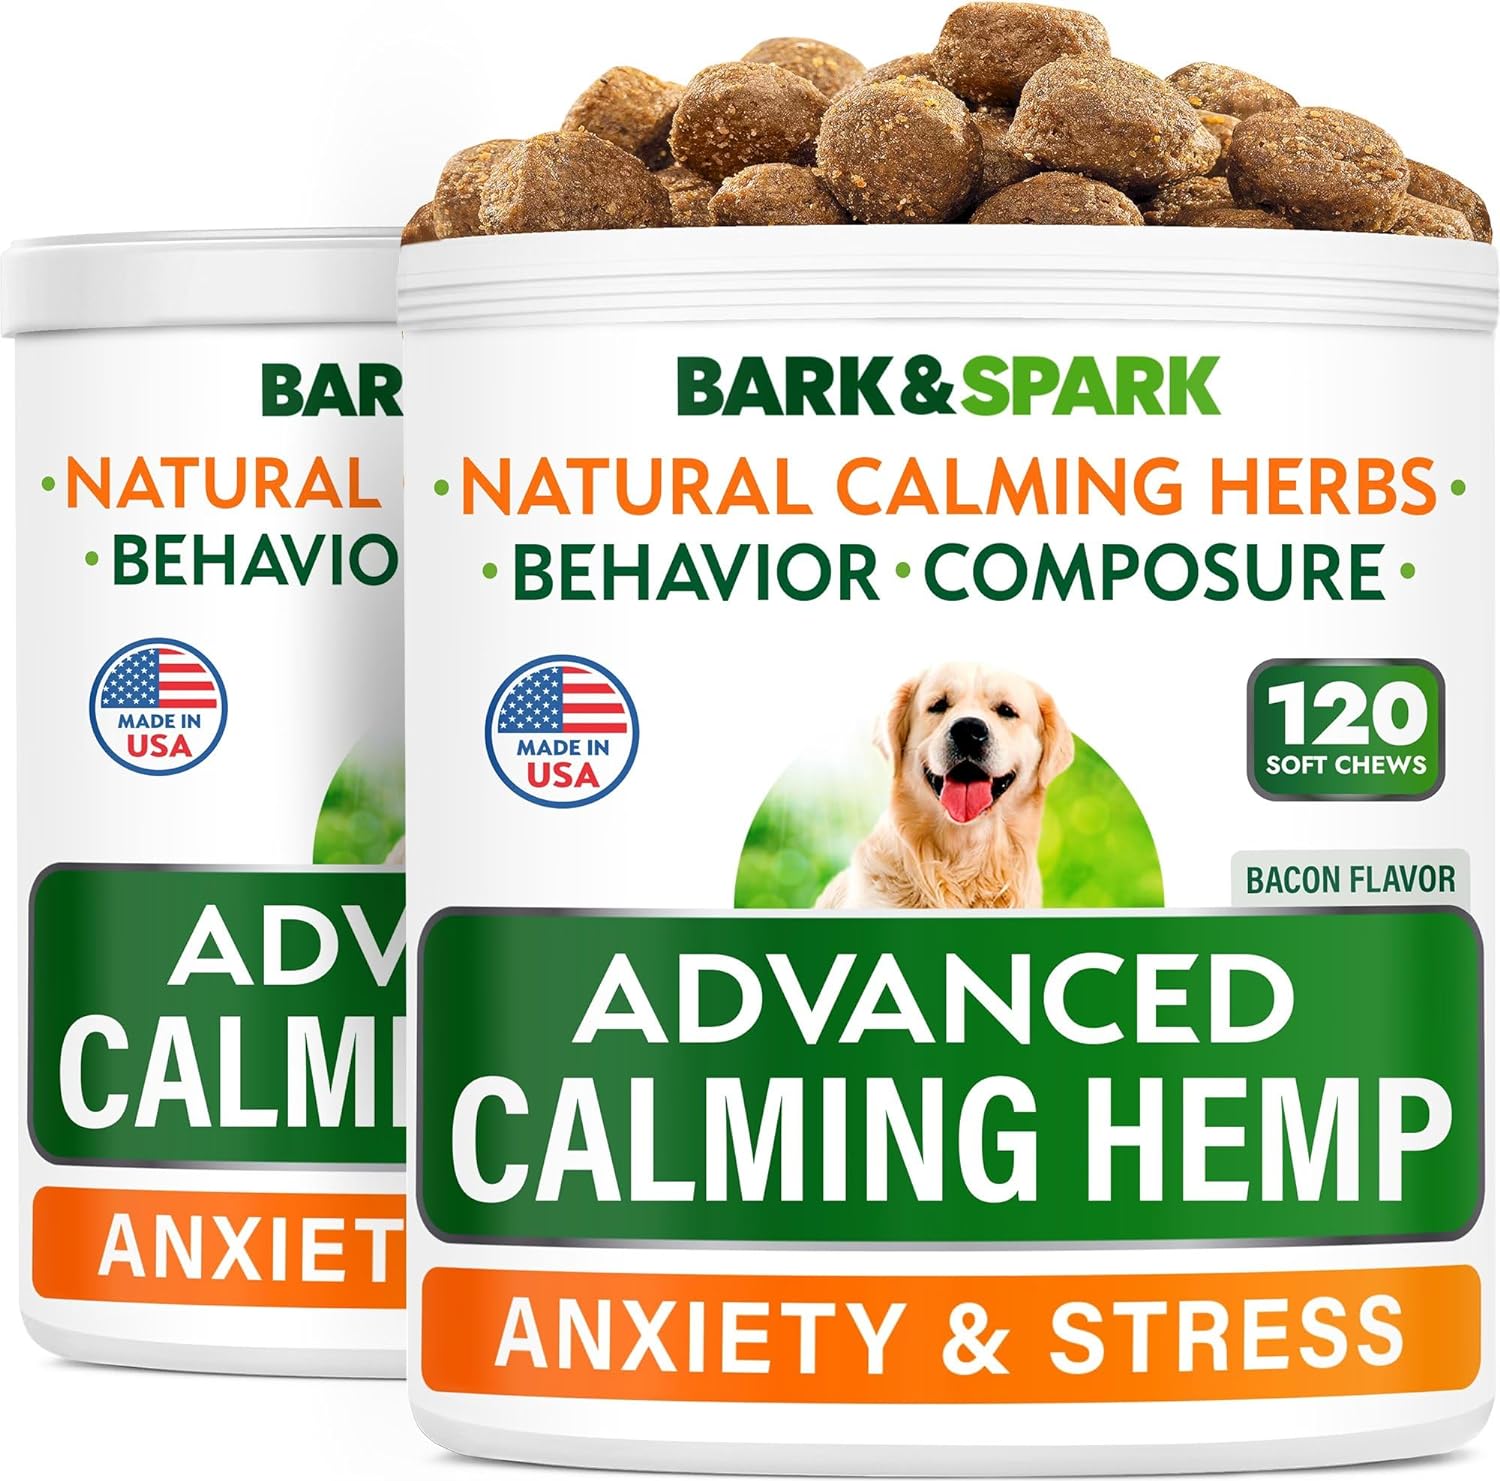 Advanced Calming Hemp Treats for Dogs - Hemp Oil + Melatonin - Anxiety Relief - Separation Aid - Stress Relief During Fireworks, Storms, Thunder - Aggressive Behavior, Barking - 240 Chews (2pack)